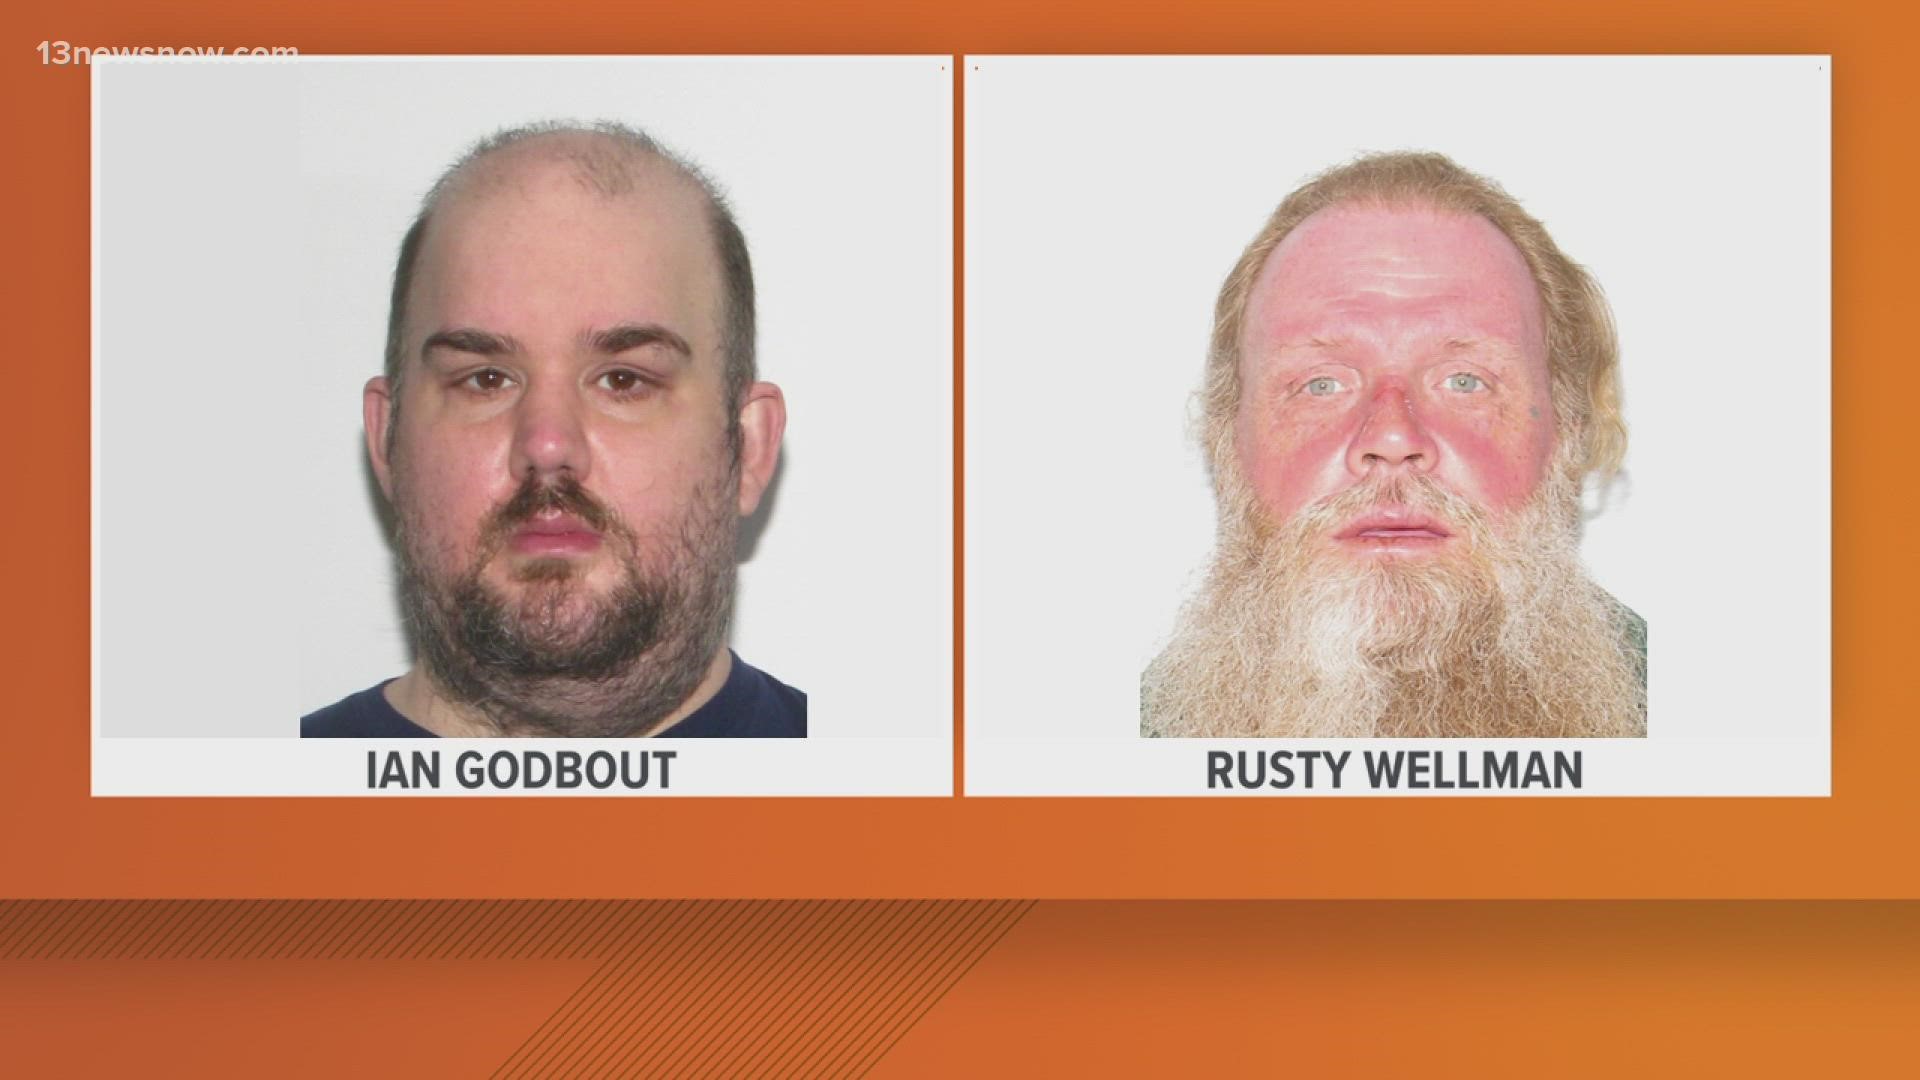 Suffolk Police officers are looking for two men who went missing without their medication Monday afternoon.